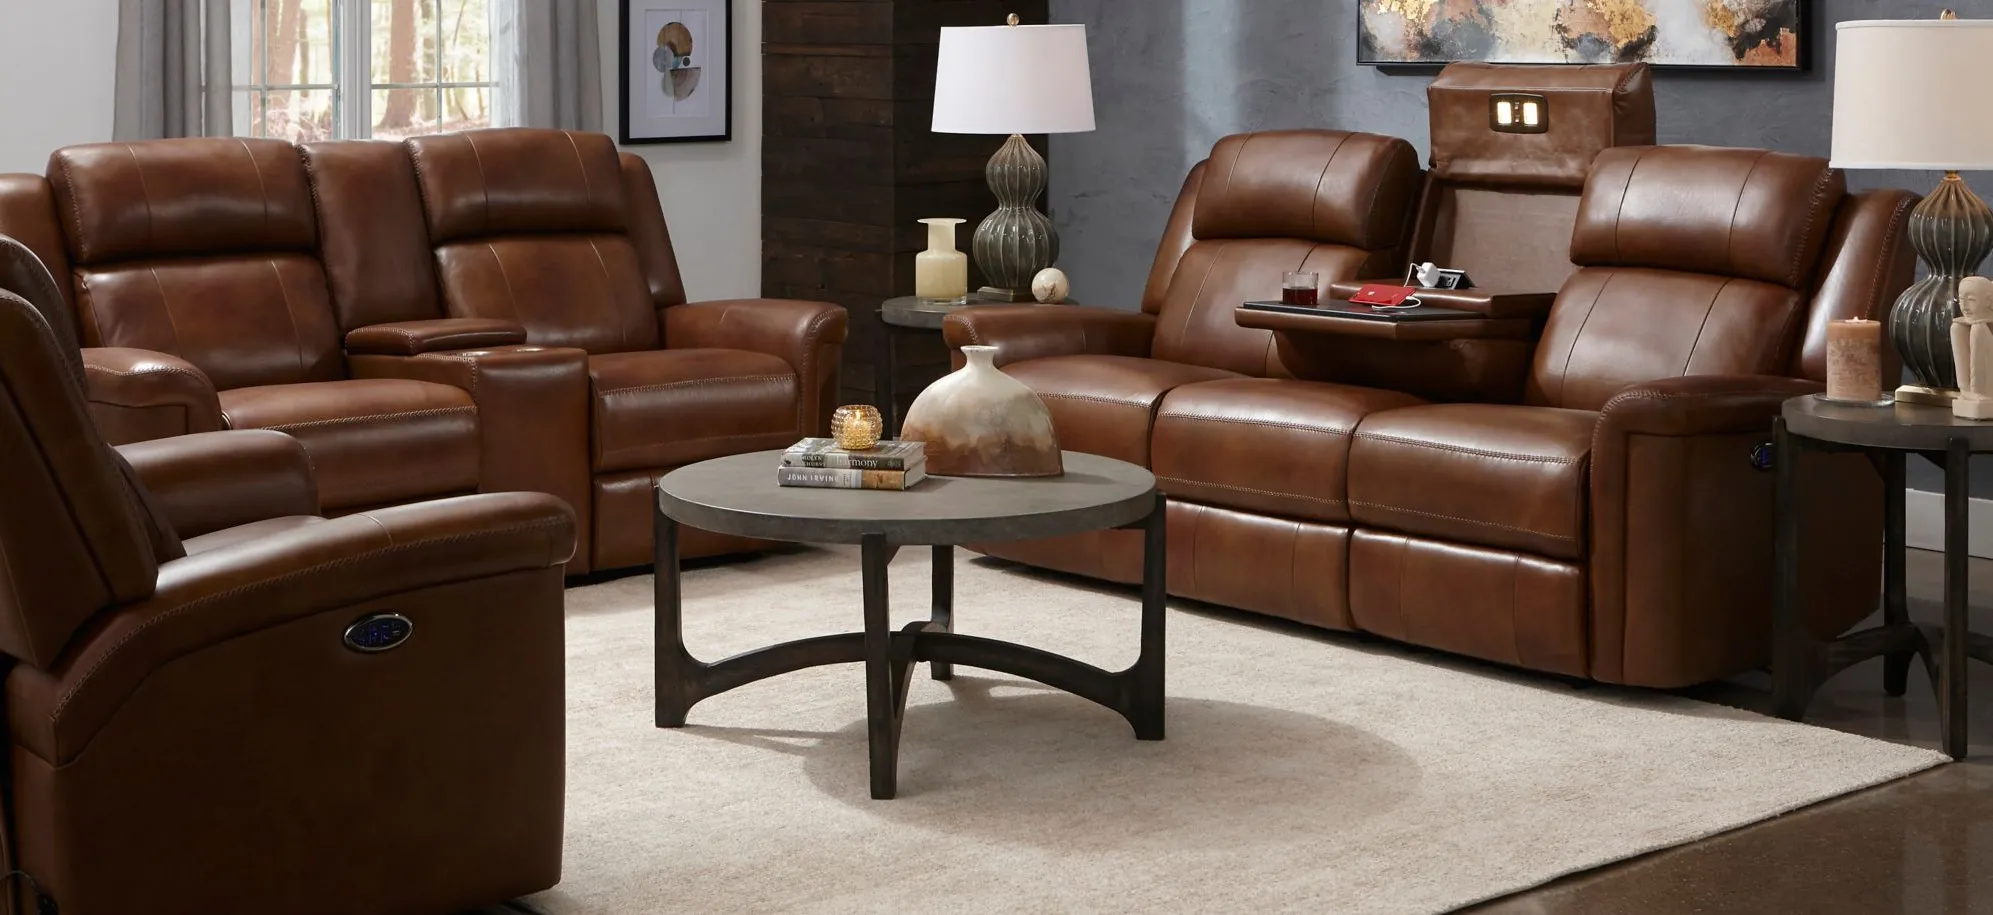 Richfield 2-pc.. Leather Power Sofa and Console Loveseat Set in Brown by Bellanest